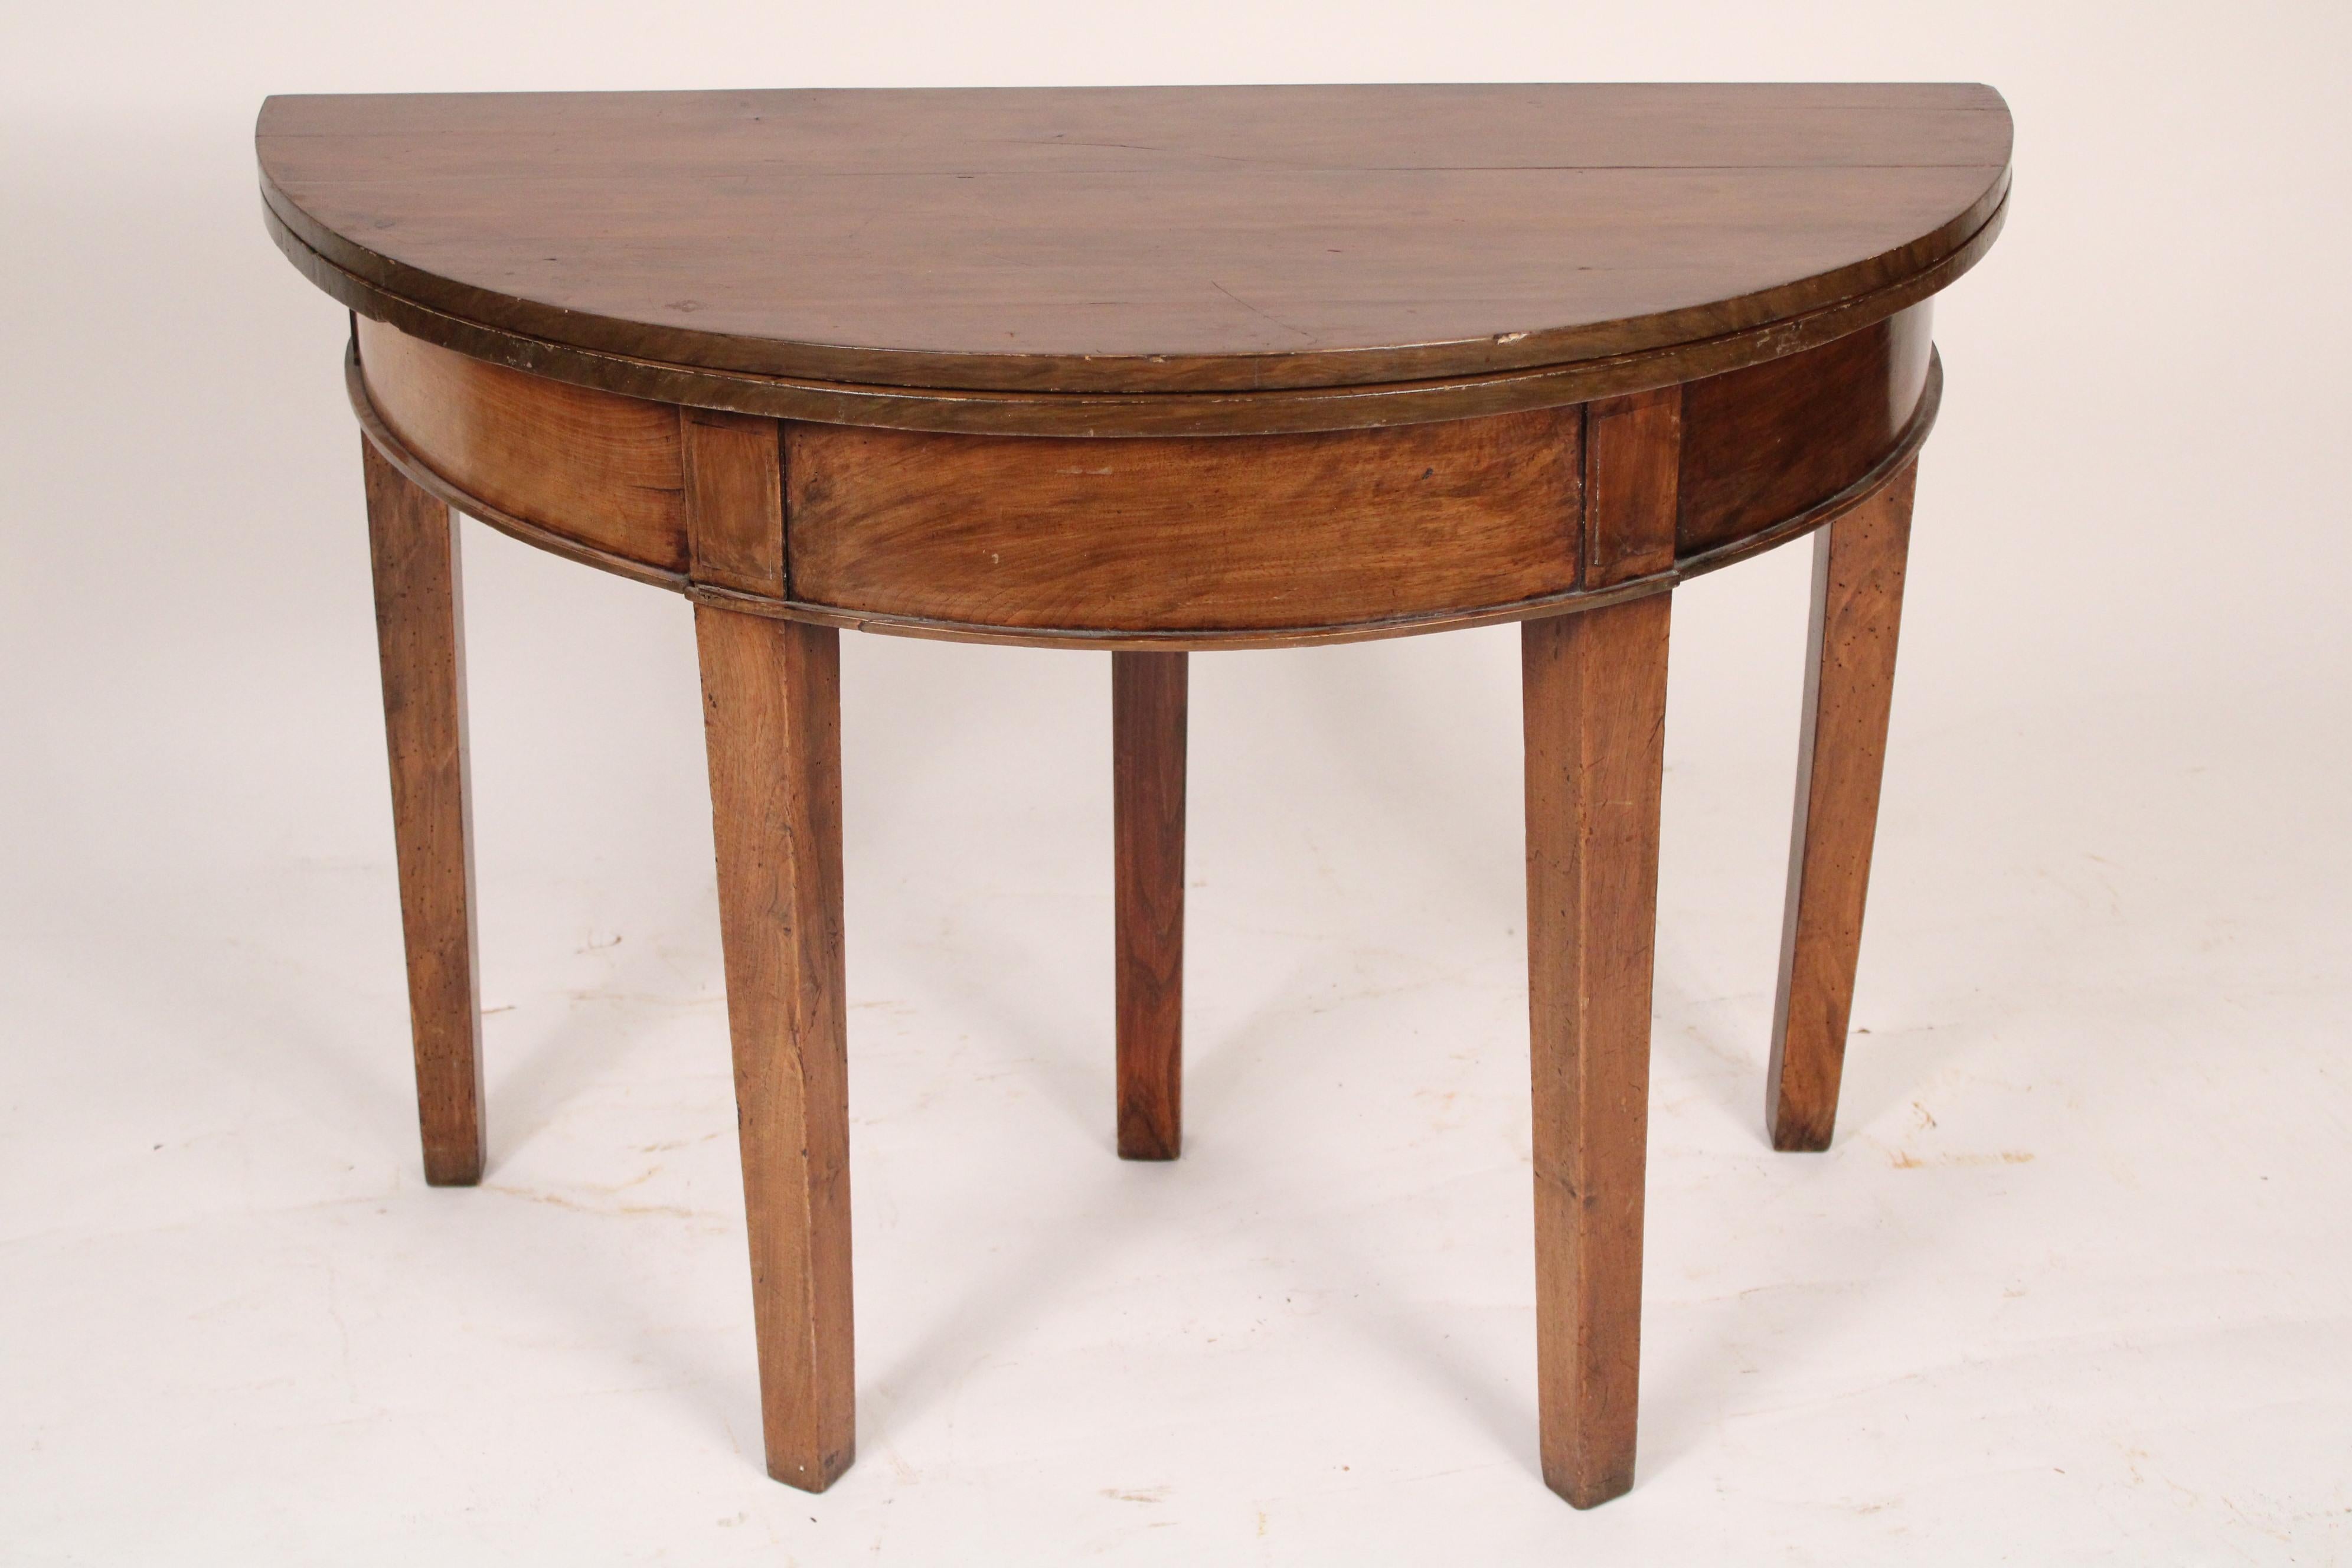 Directoire mixed wood, walnut and fruit wood, demi lune games table, circa 1820. With a demi lune top, 3 frieze panels, resting on 5 square tapered legs. When opened the back leg pulls straight out to support the top. Dimensions of top when opened